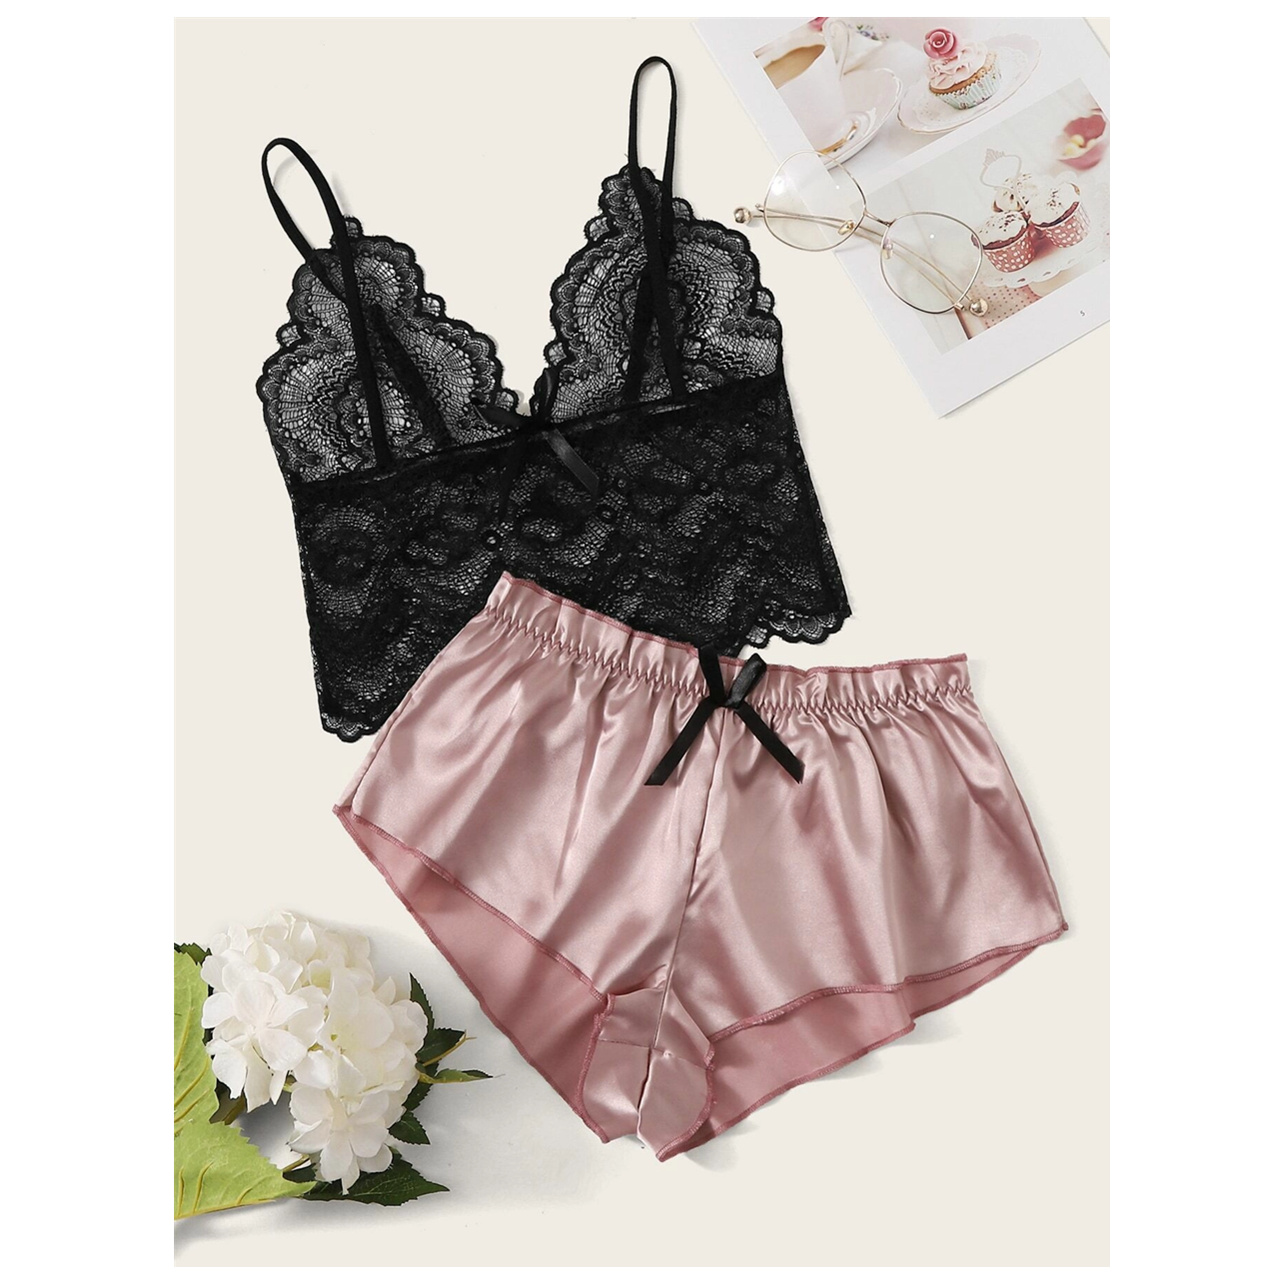 Floral lace bralette with satin shorts s